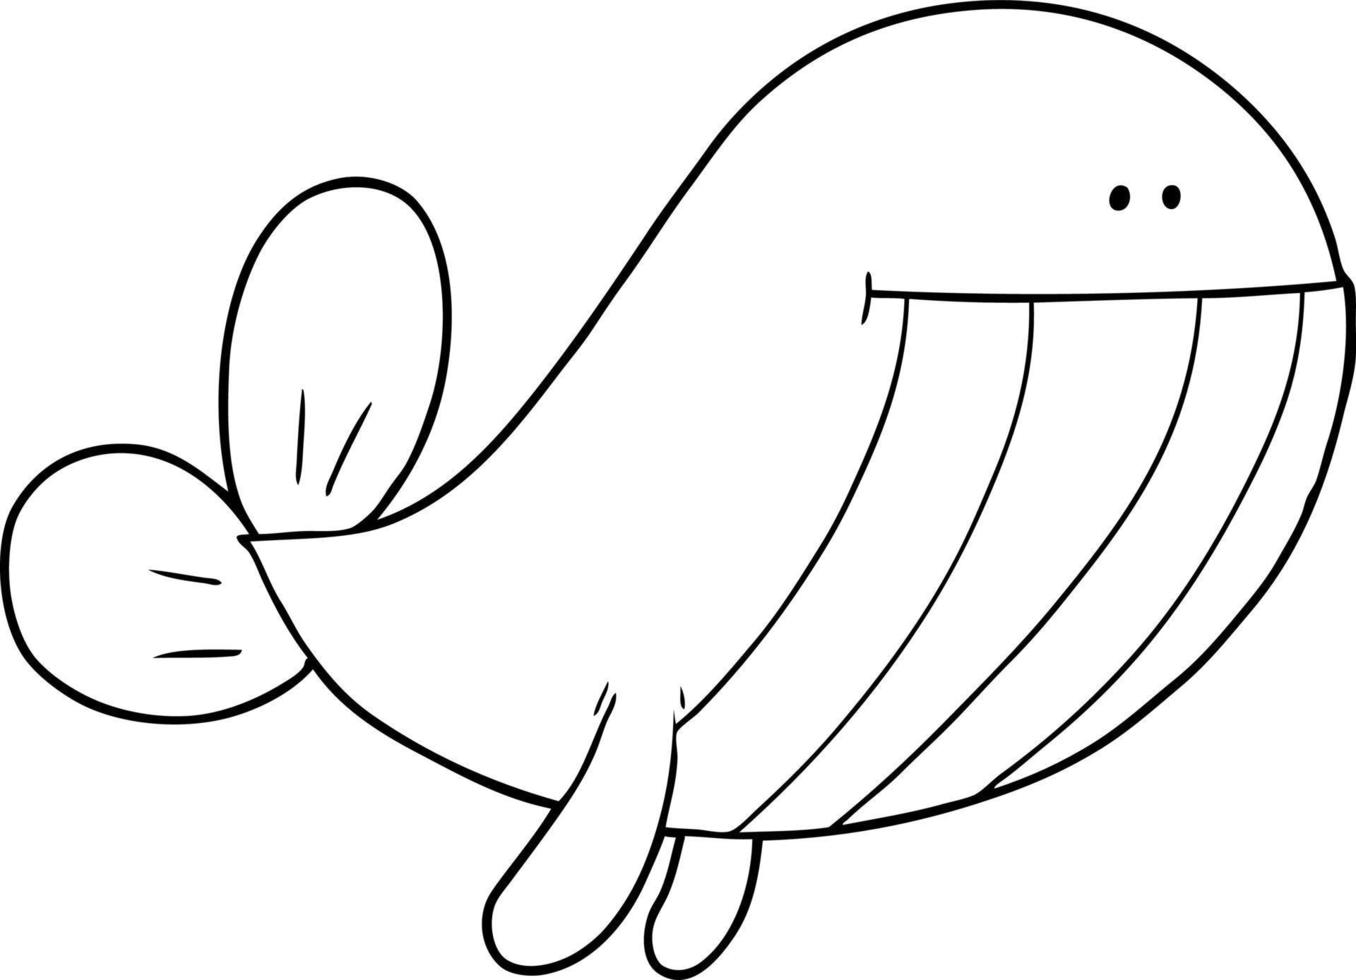 line drawing cartoon whale vector